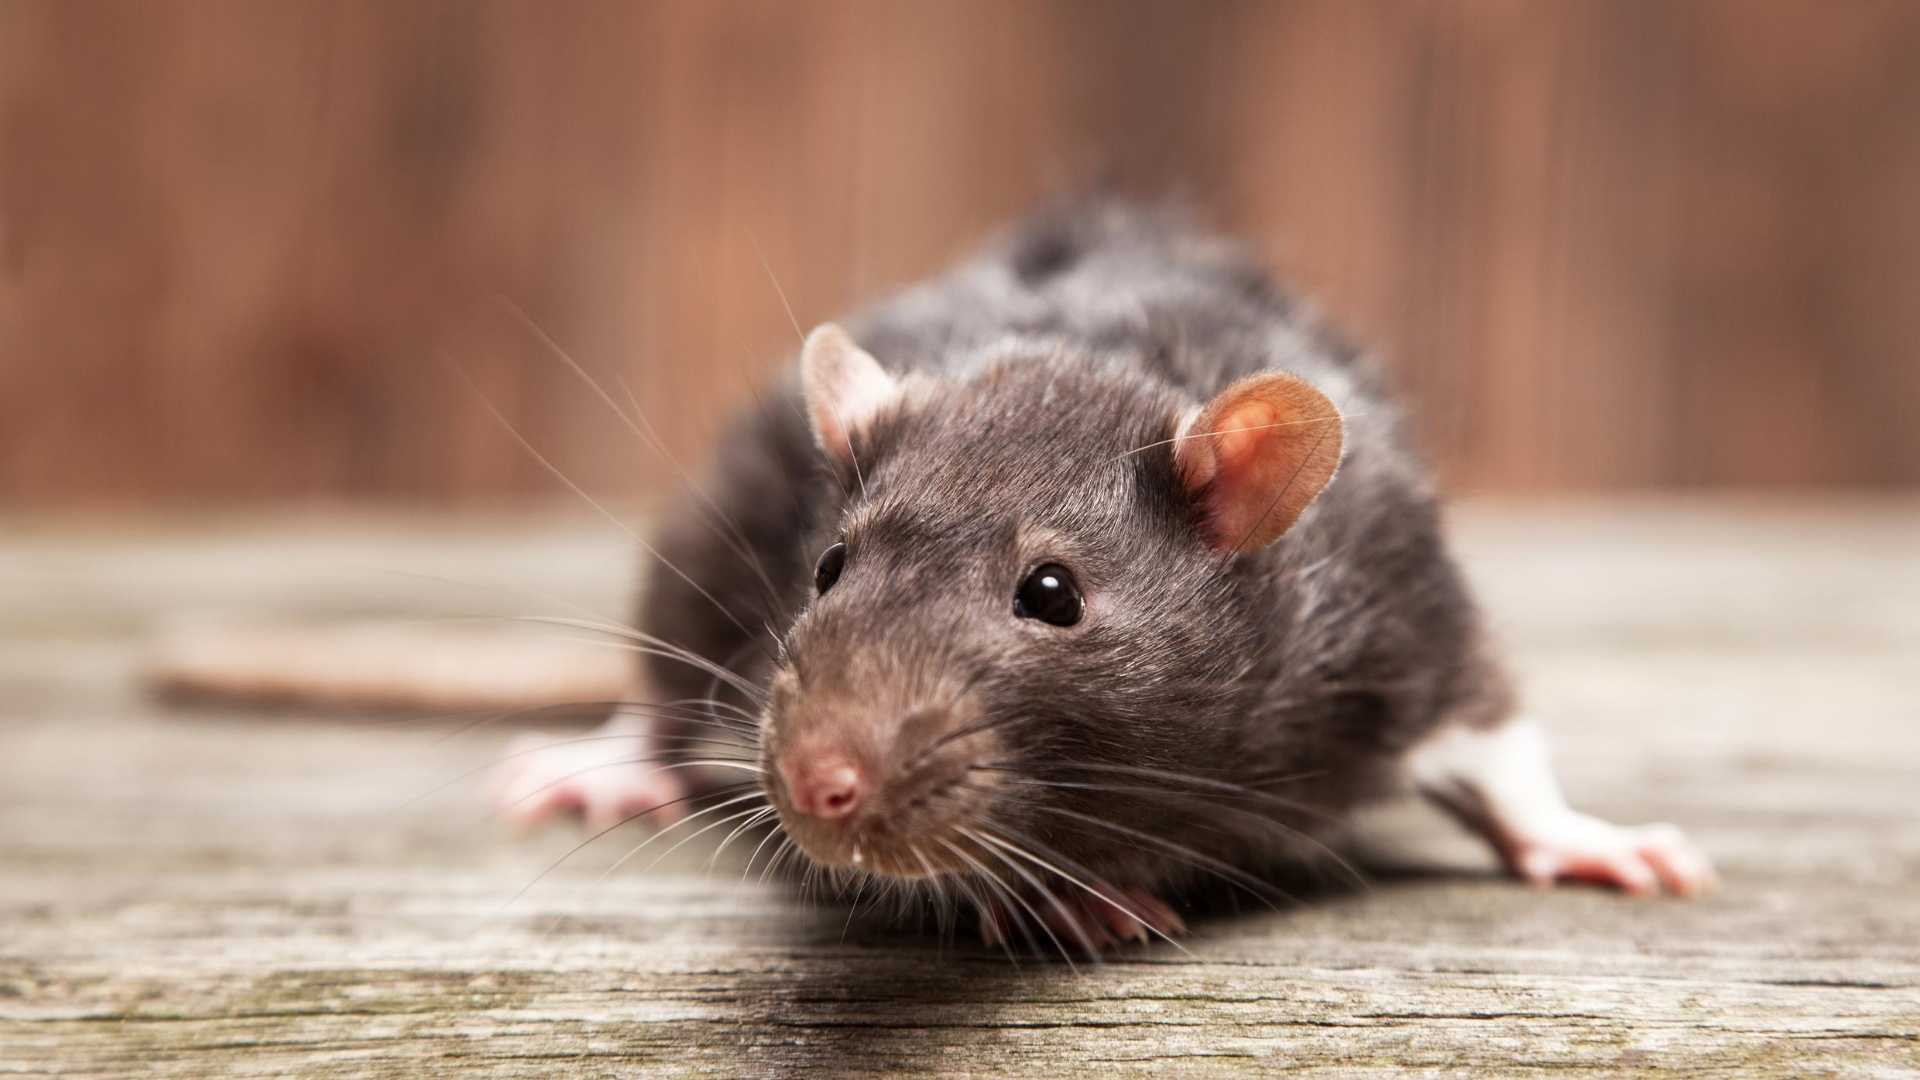 How To Get Rid Of Rats Without Poison - 5 Ways